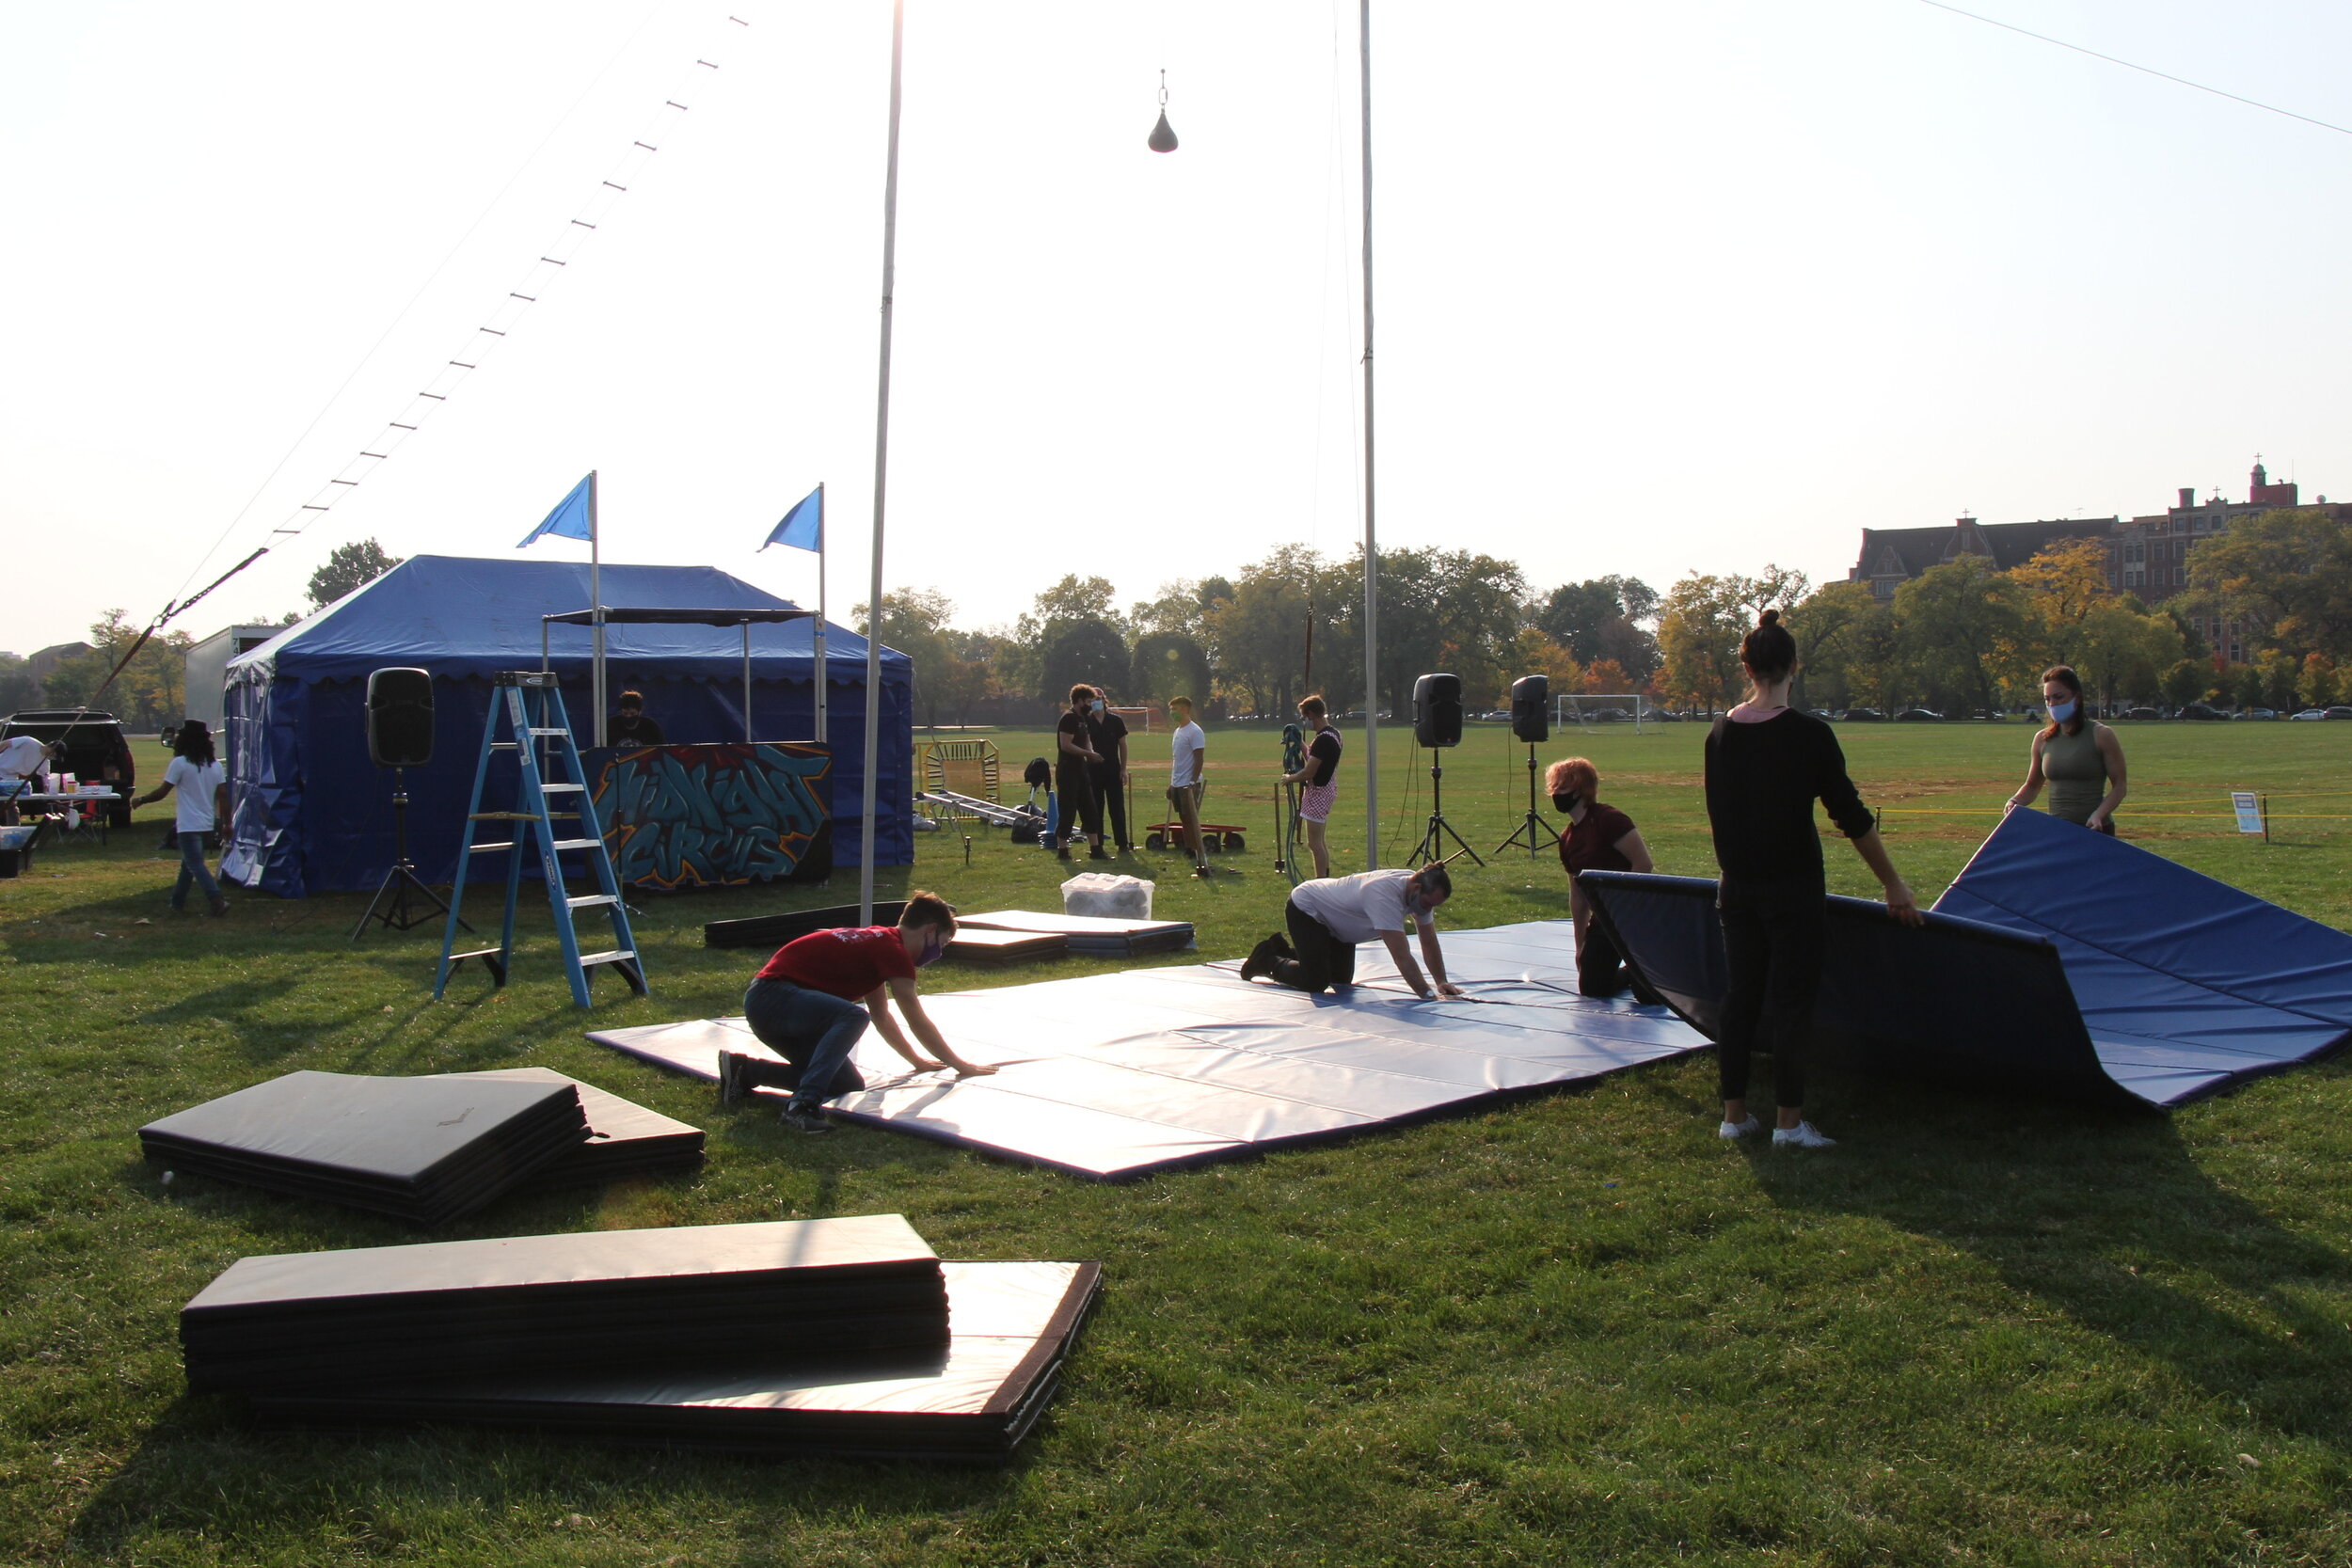  On the morning of the open-air show volunteers and acrobats set up the stage at Park No. 218. (Photo taken by Sabrina Hart) 